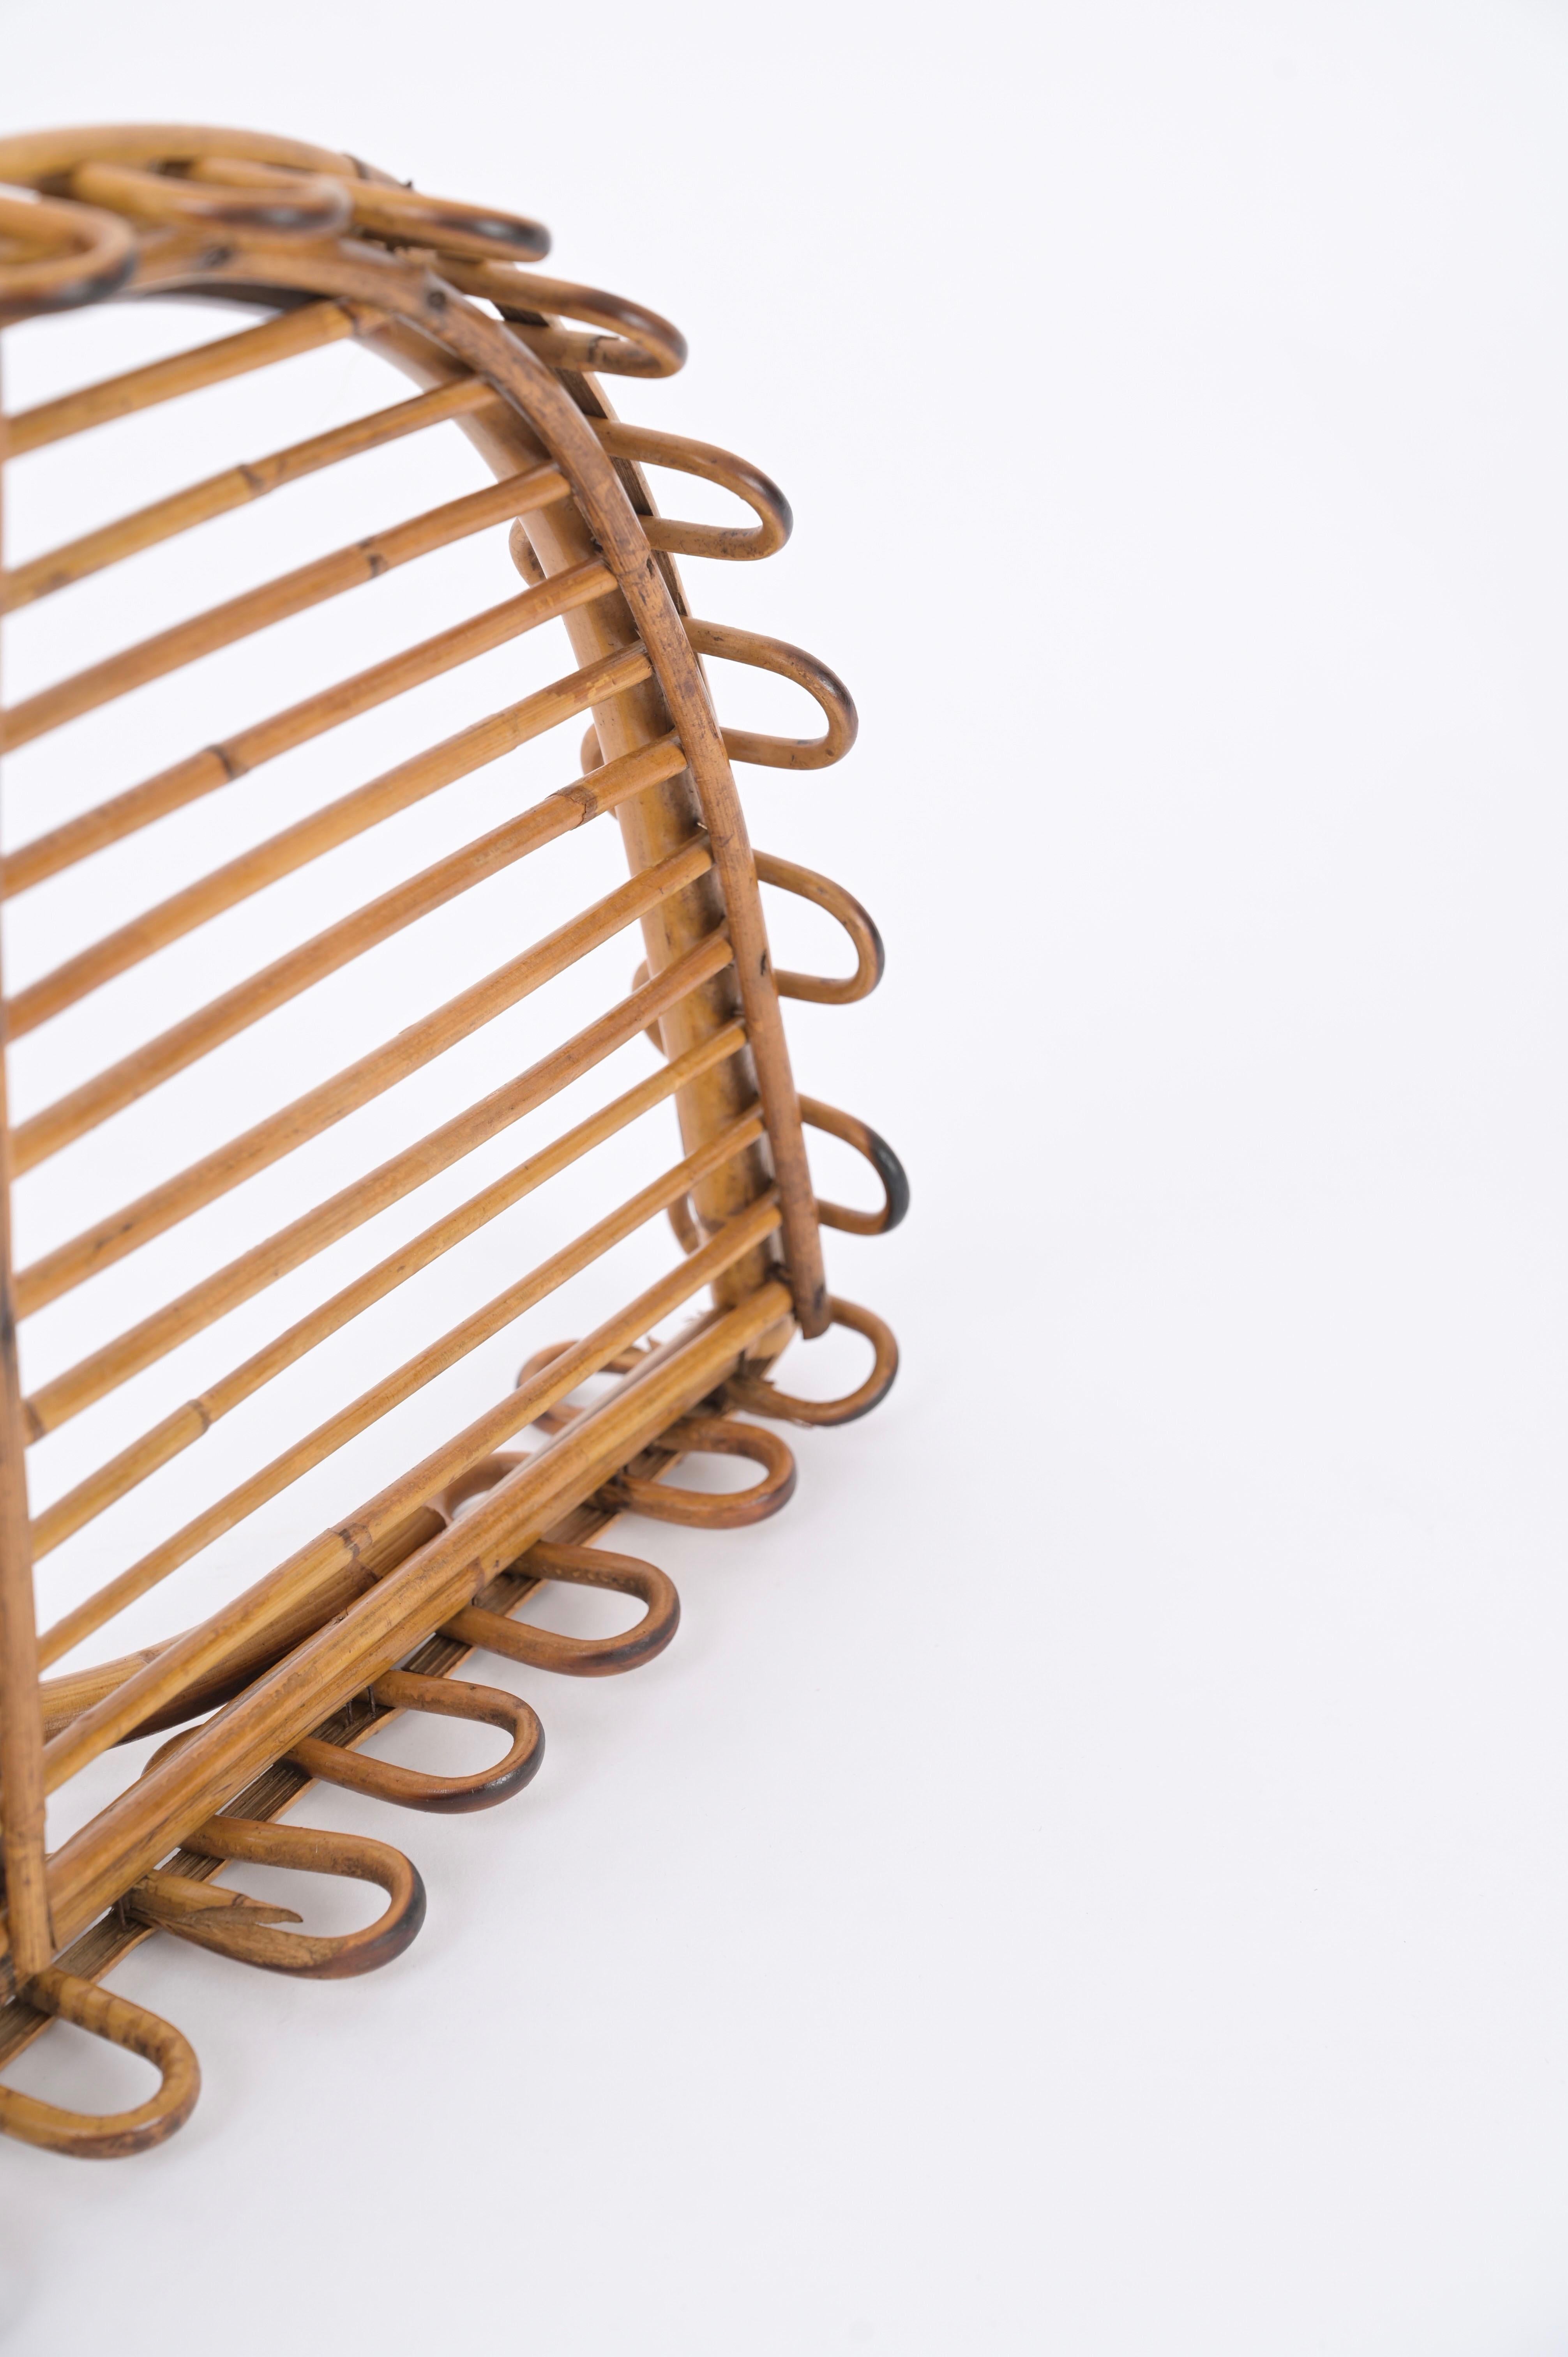 Midcentury Rattan and Bamboo Wall Shelf, Franco Albini, Italy, 1960s For Sale 6